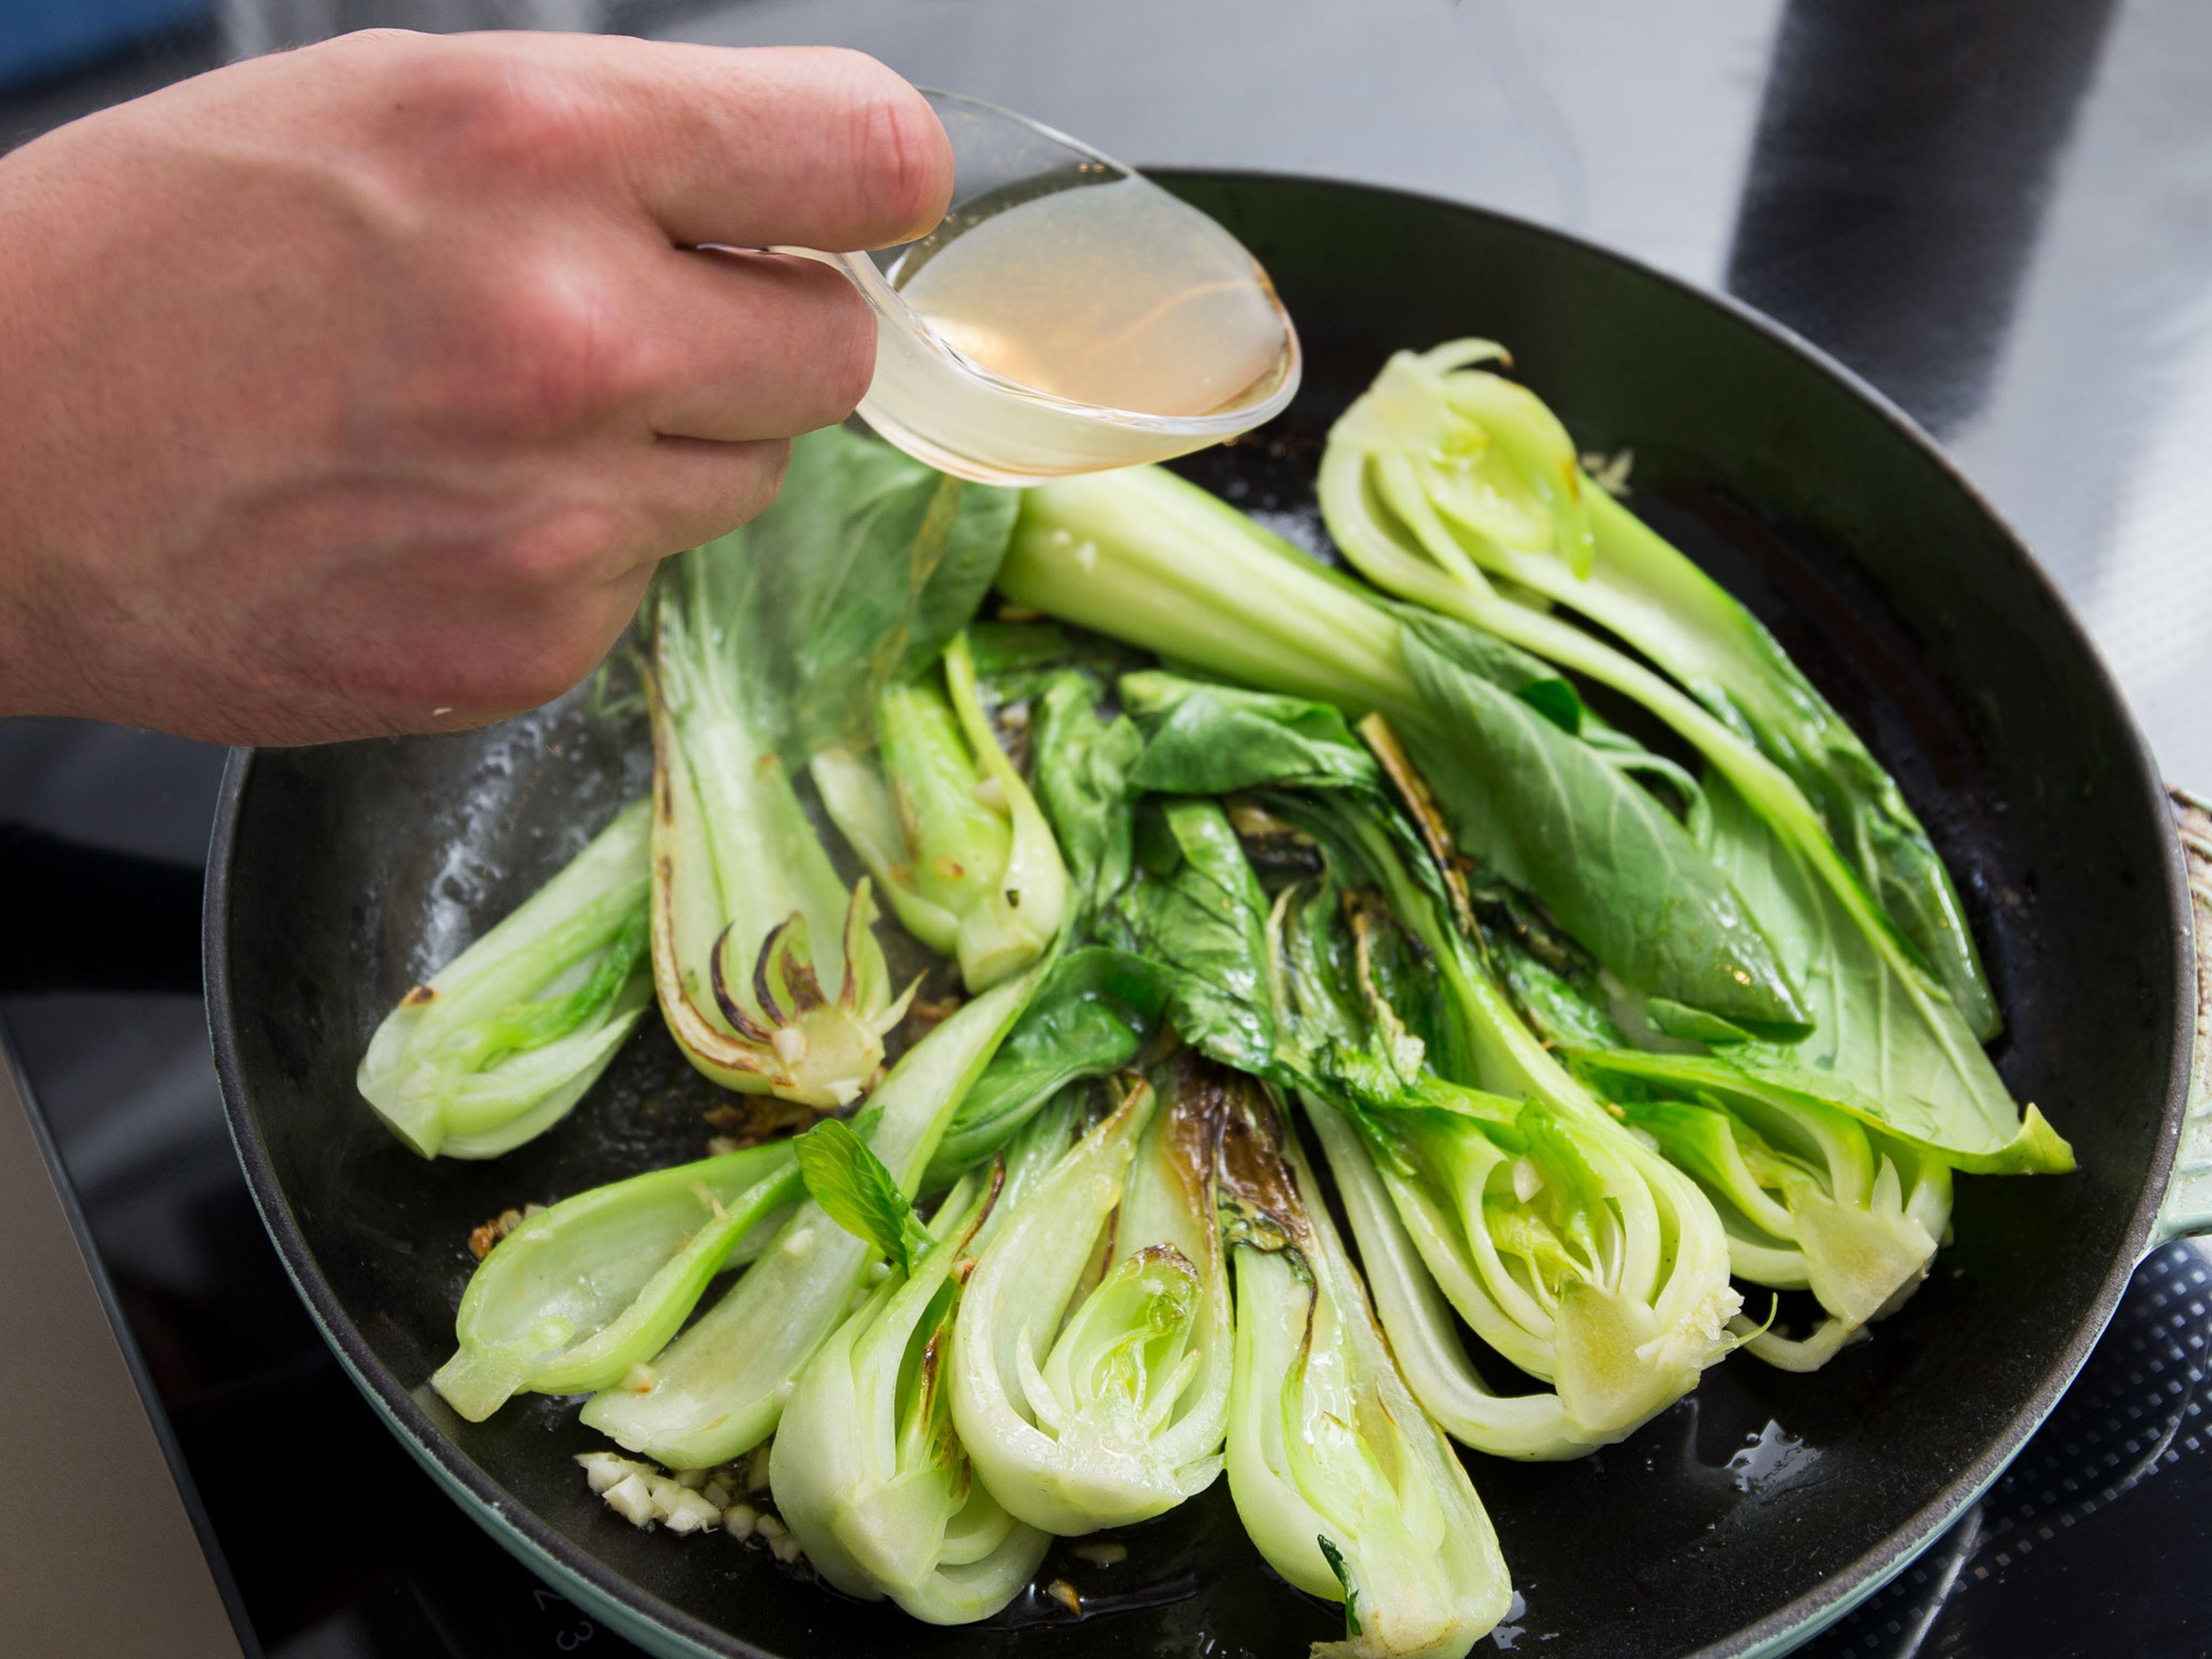 Heat oil in a large frying pan set over medium-low heat. Fry half of the chopped garlic for approx. 1 – 2 min., then add baby bok choy. Season with salt and pepper. Deglaze with vegetable stock and cover pan with lid. Cook for approx. 3 – 4 min. or until bok choy is soft but firm to the bite.